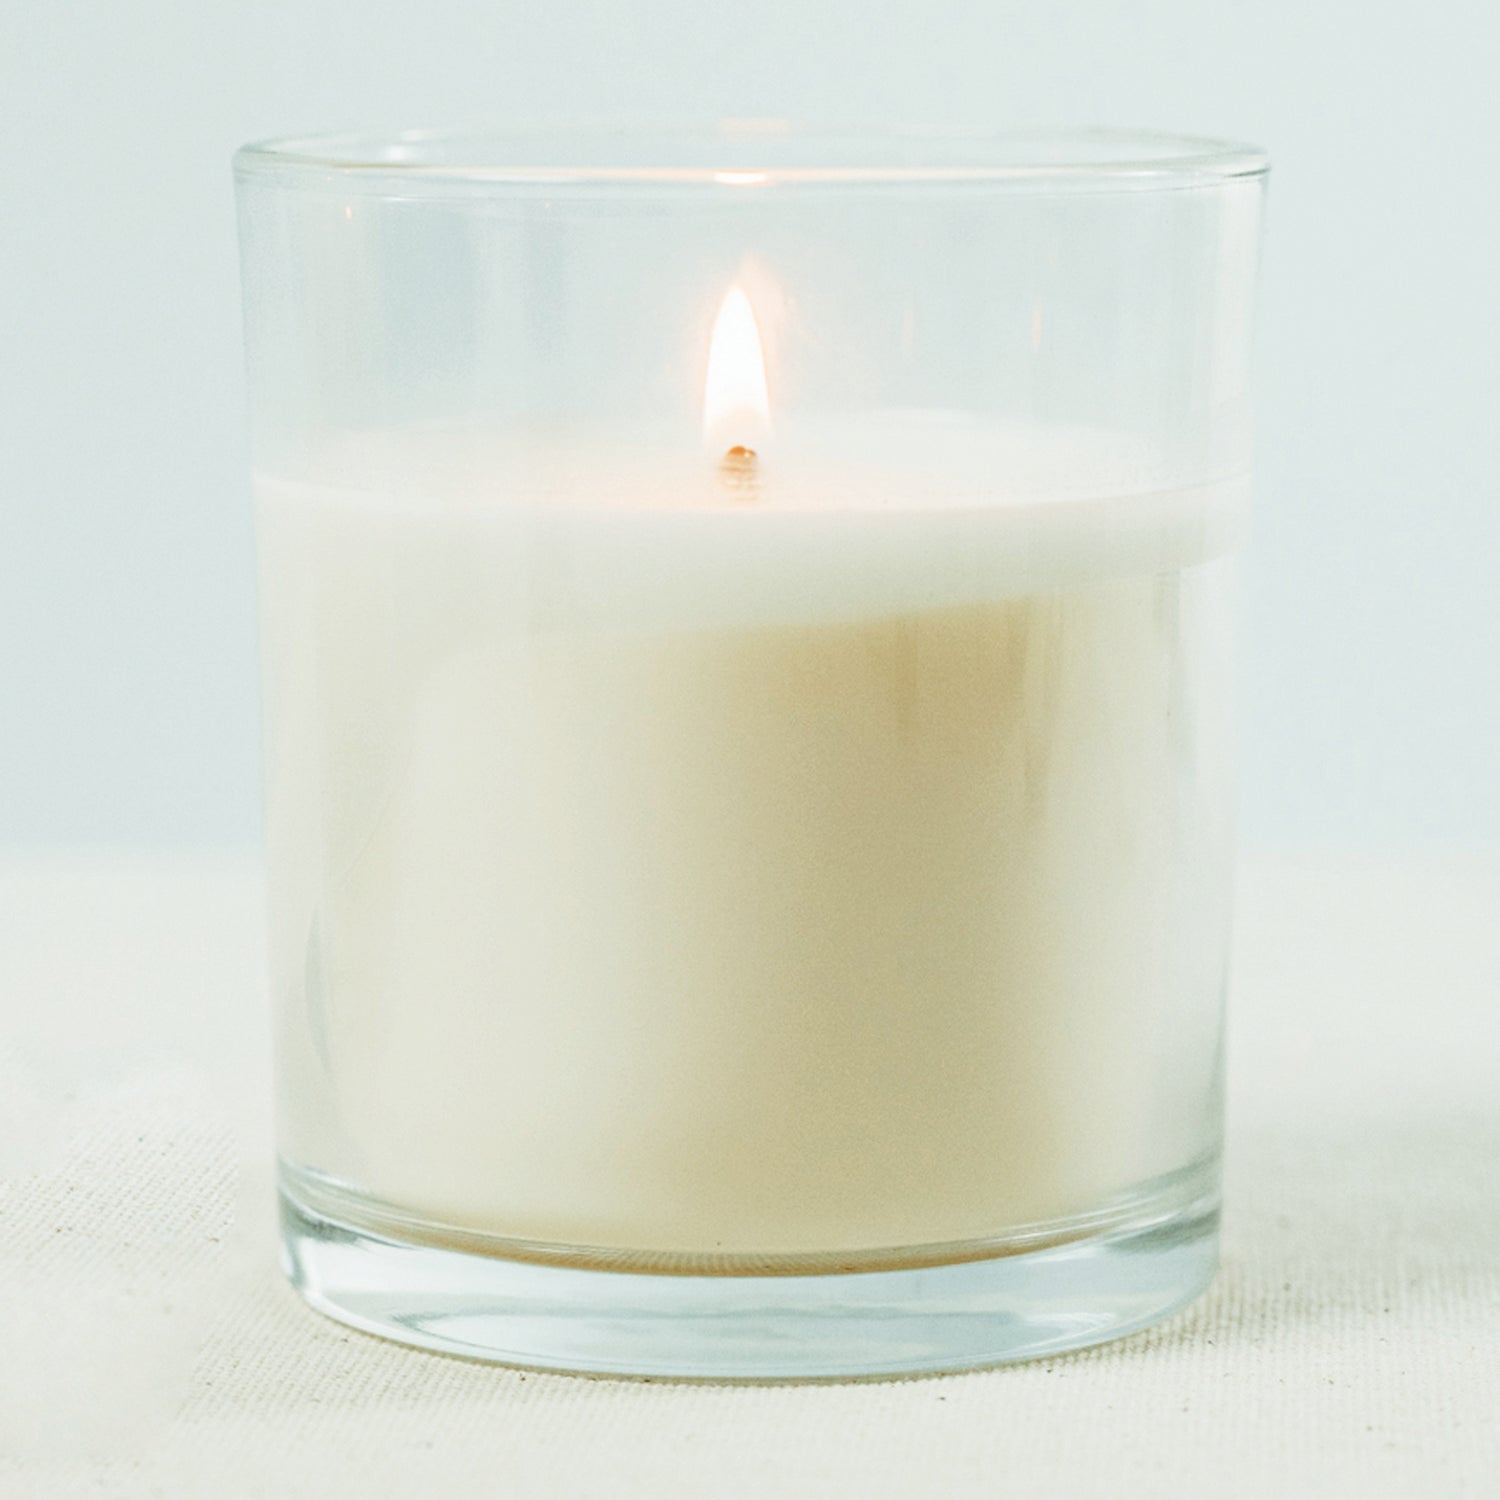 Natural Soy Wax and DIY Candle Making Supplies - 5 Lbs Soy Candle